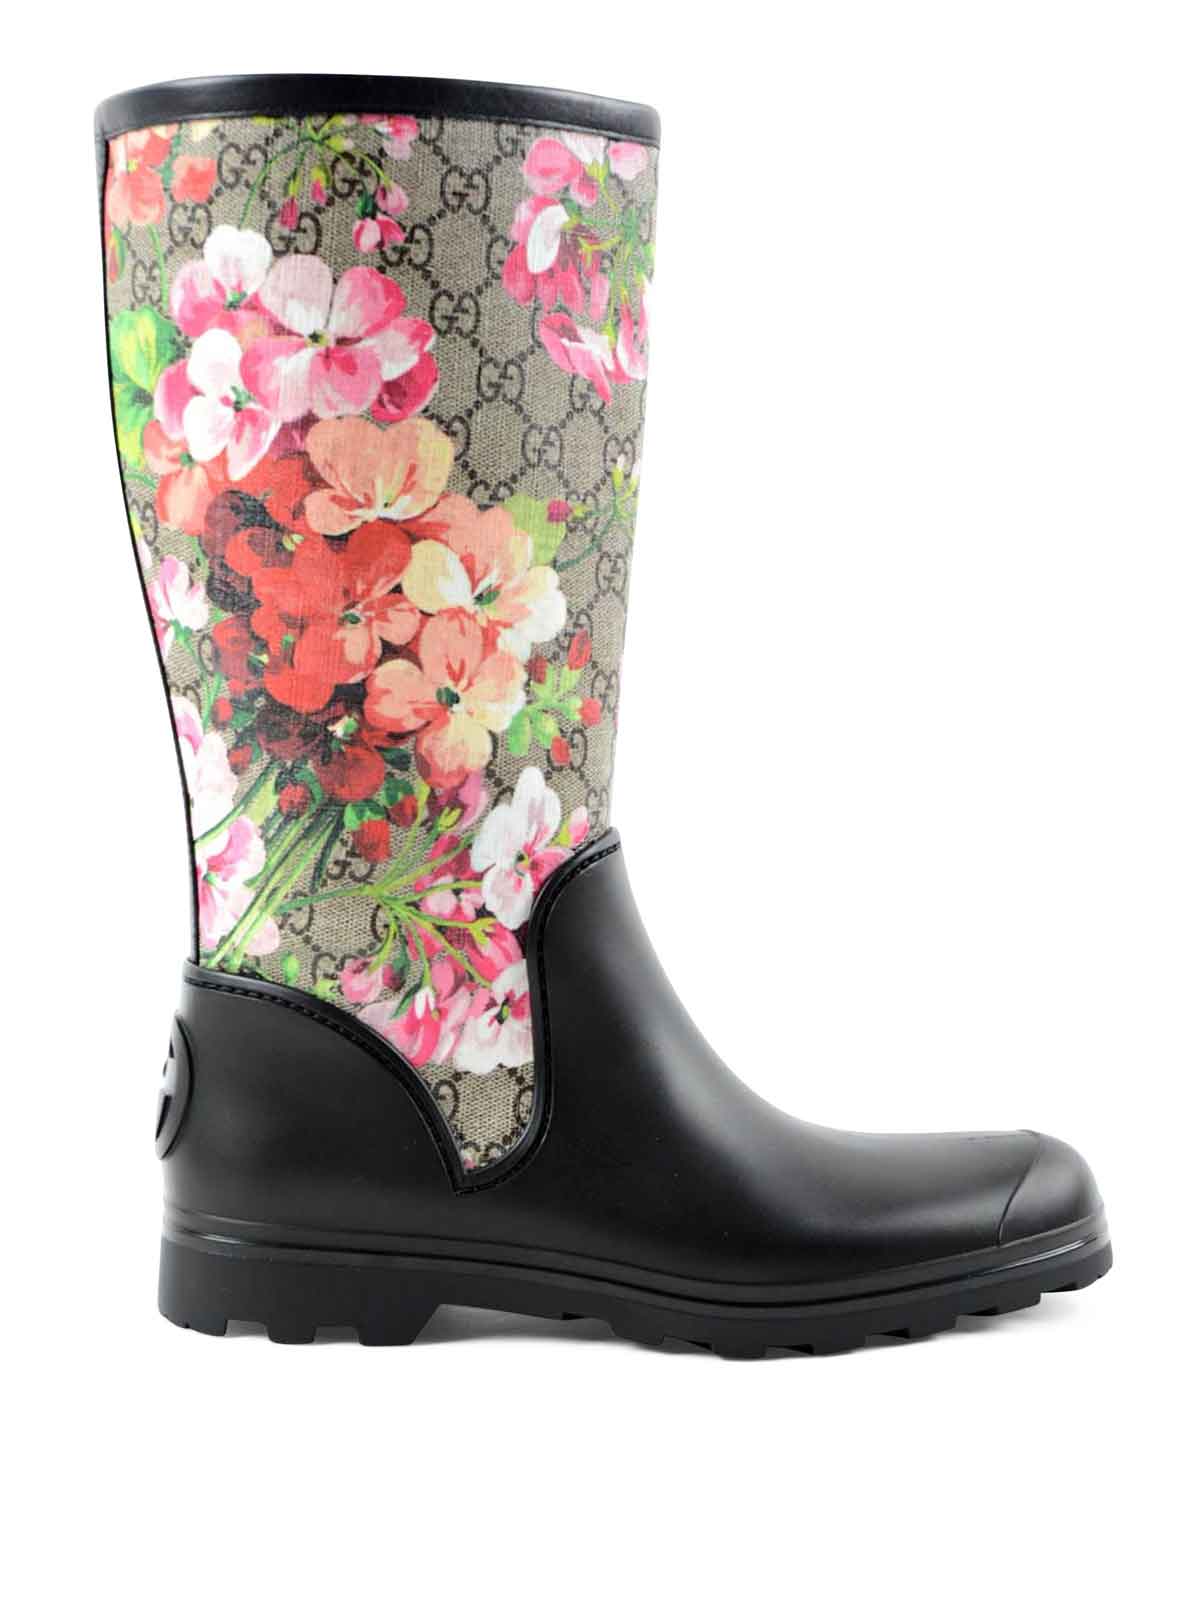 Top 48+ imagen gucci rubber boots - Ecover.mx